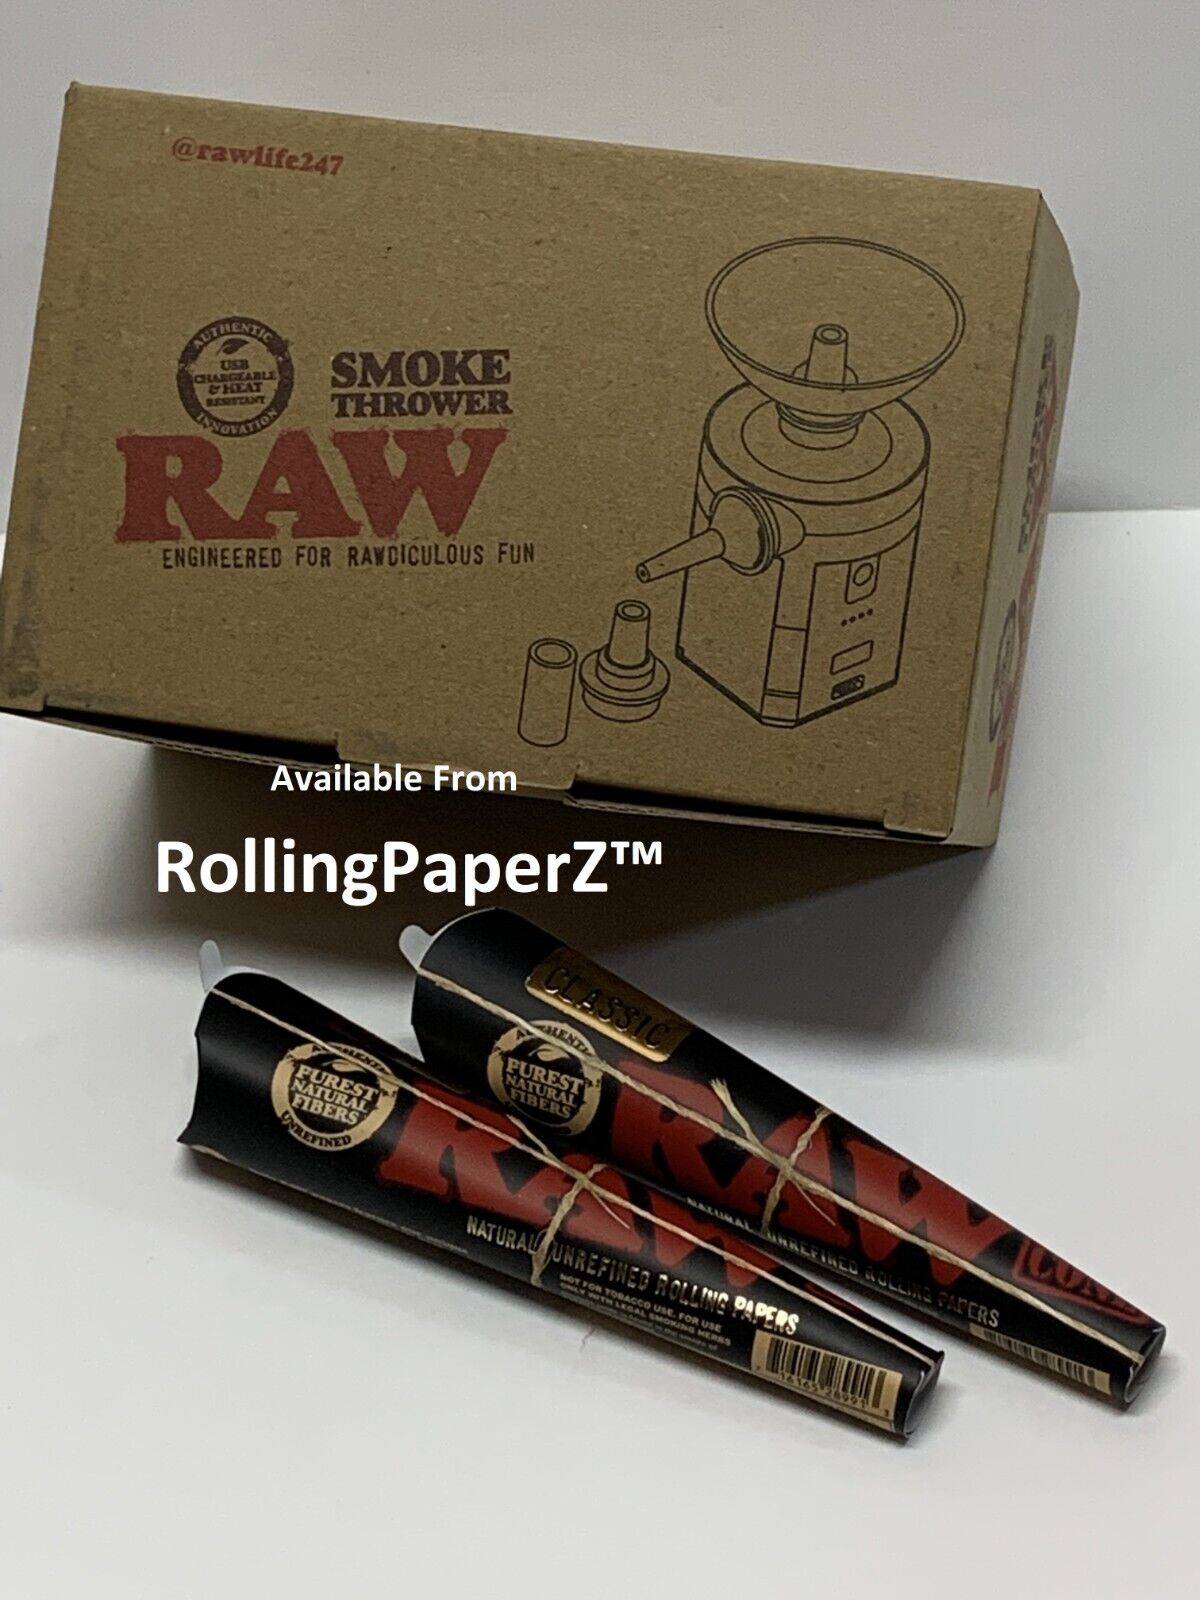 RAW SMOKE THROWER + 12 Pre Rolled RAW Black 1 1/4 Size Cones (2 packs of 6)